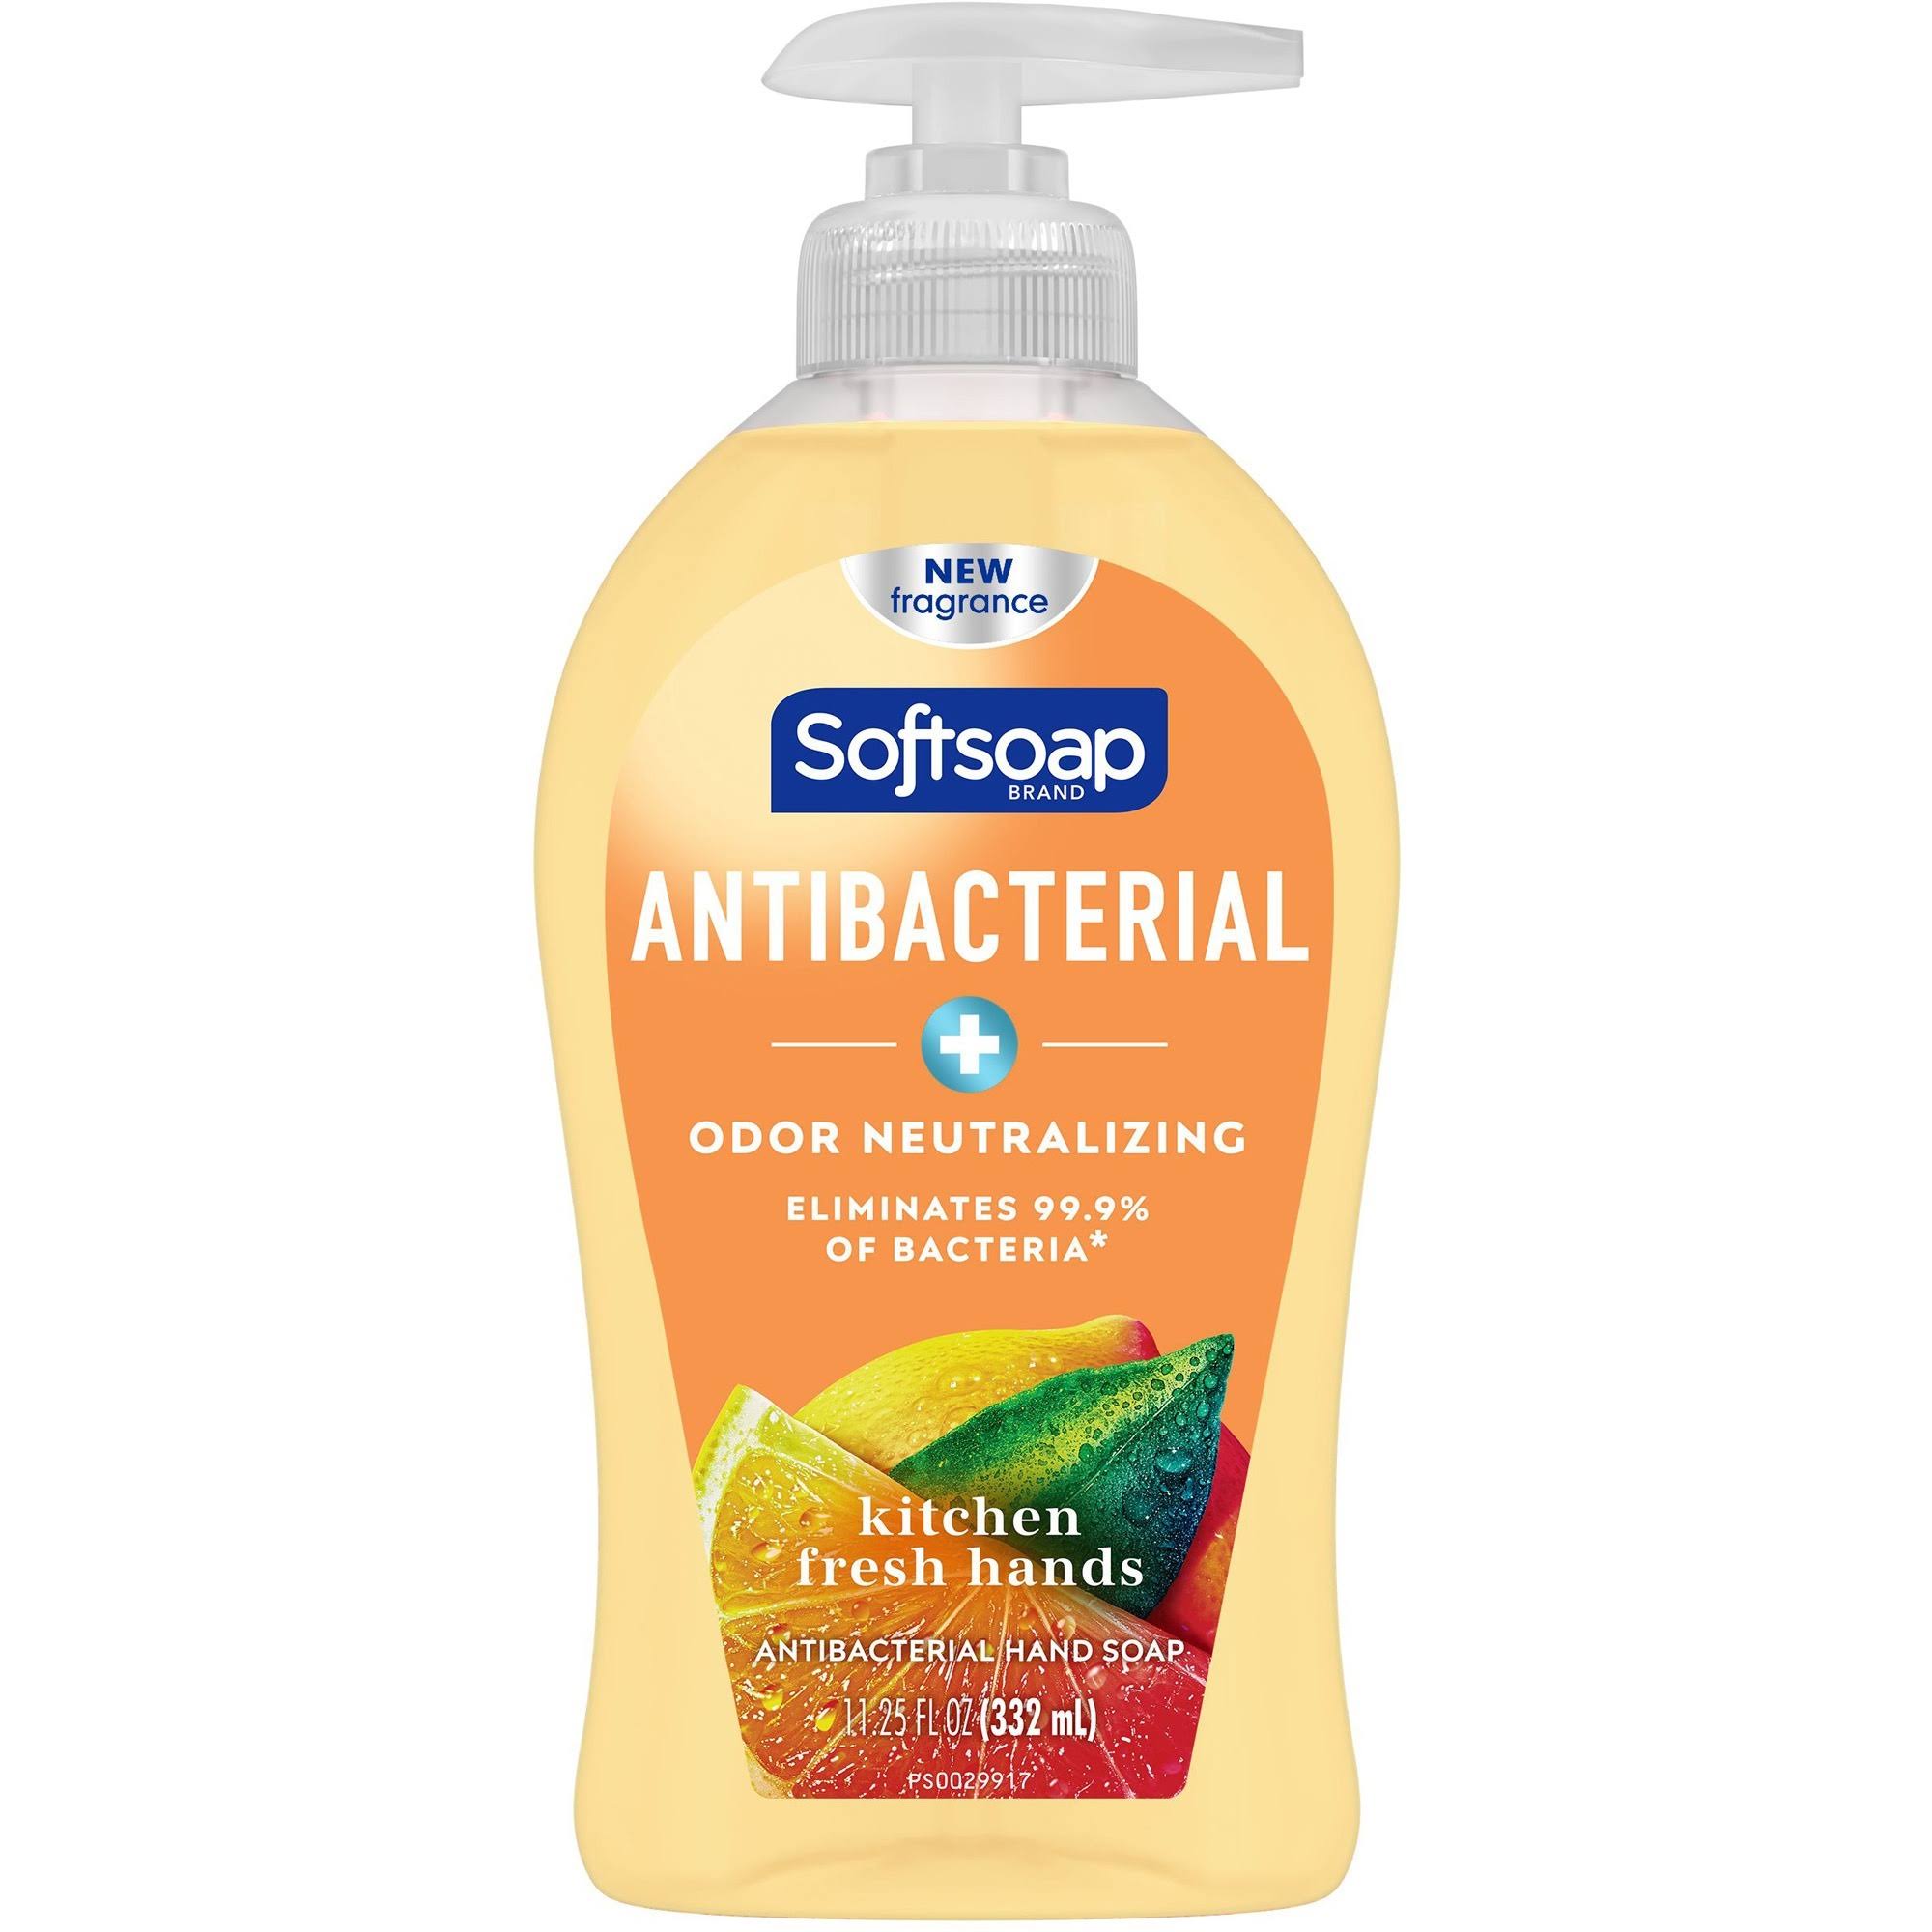 Softsoap Kitchen Fresh Hands Citrus Extracts Antibacterial Hand Soap - 11.25oz